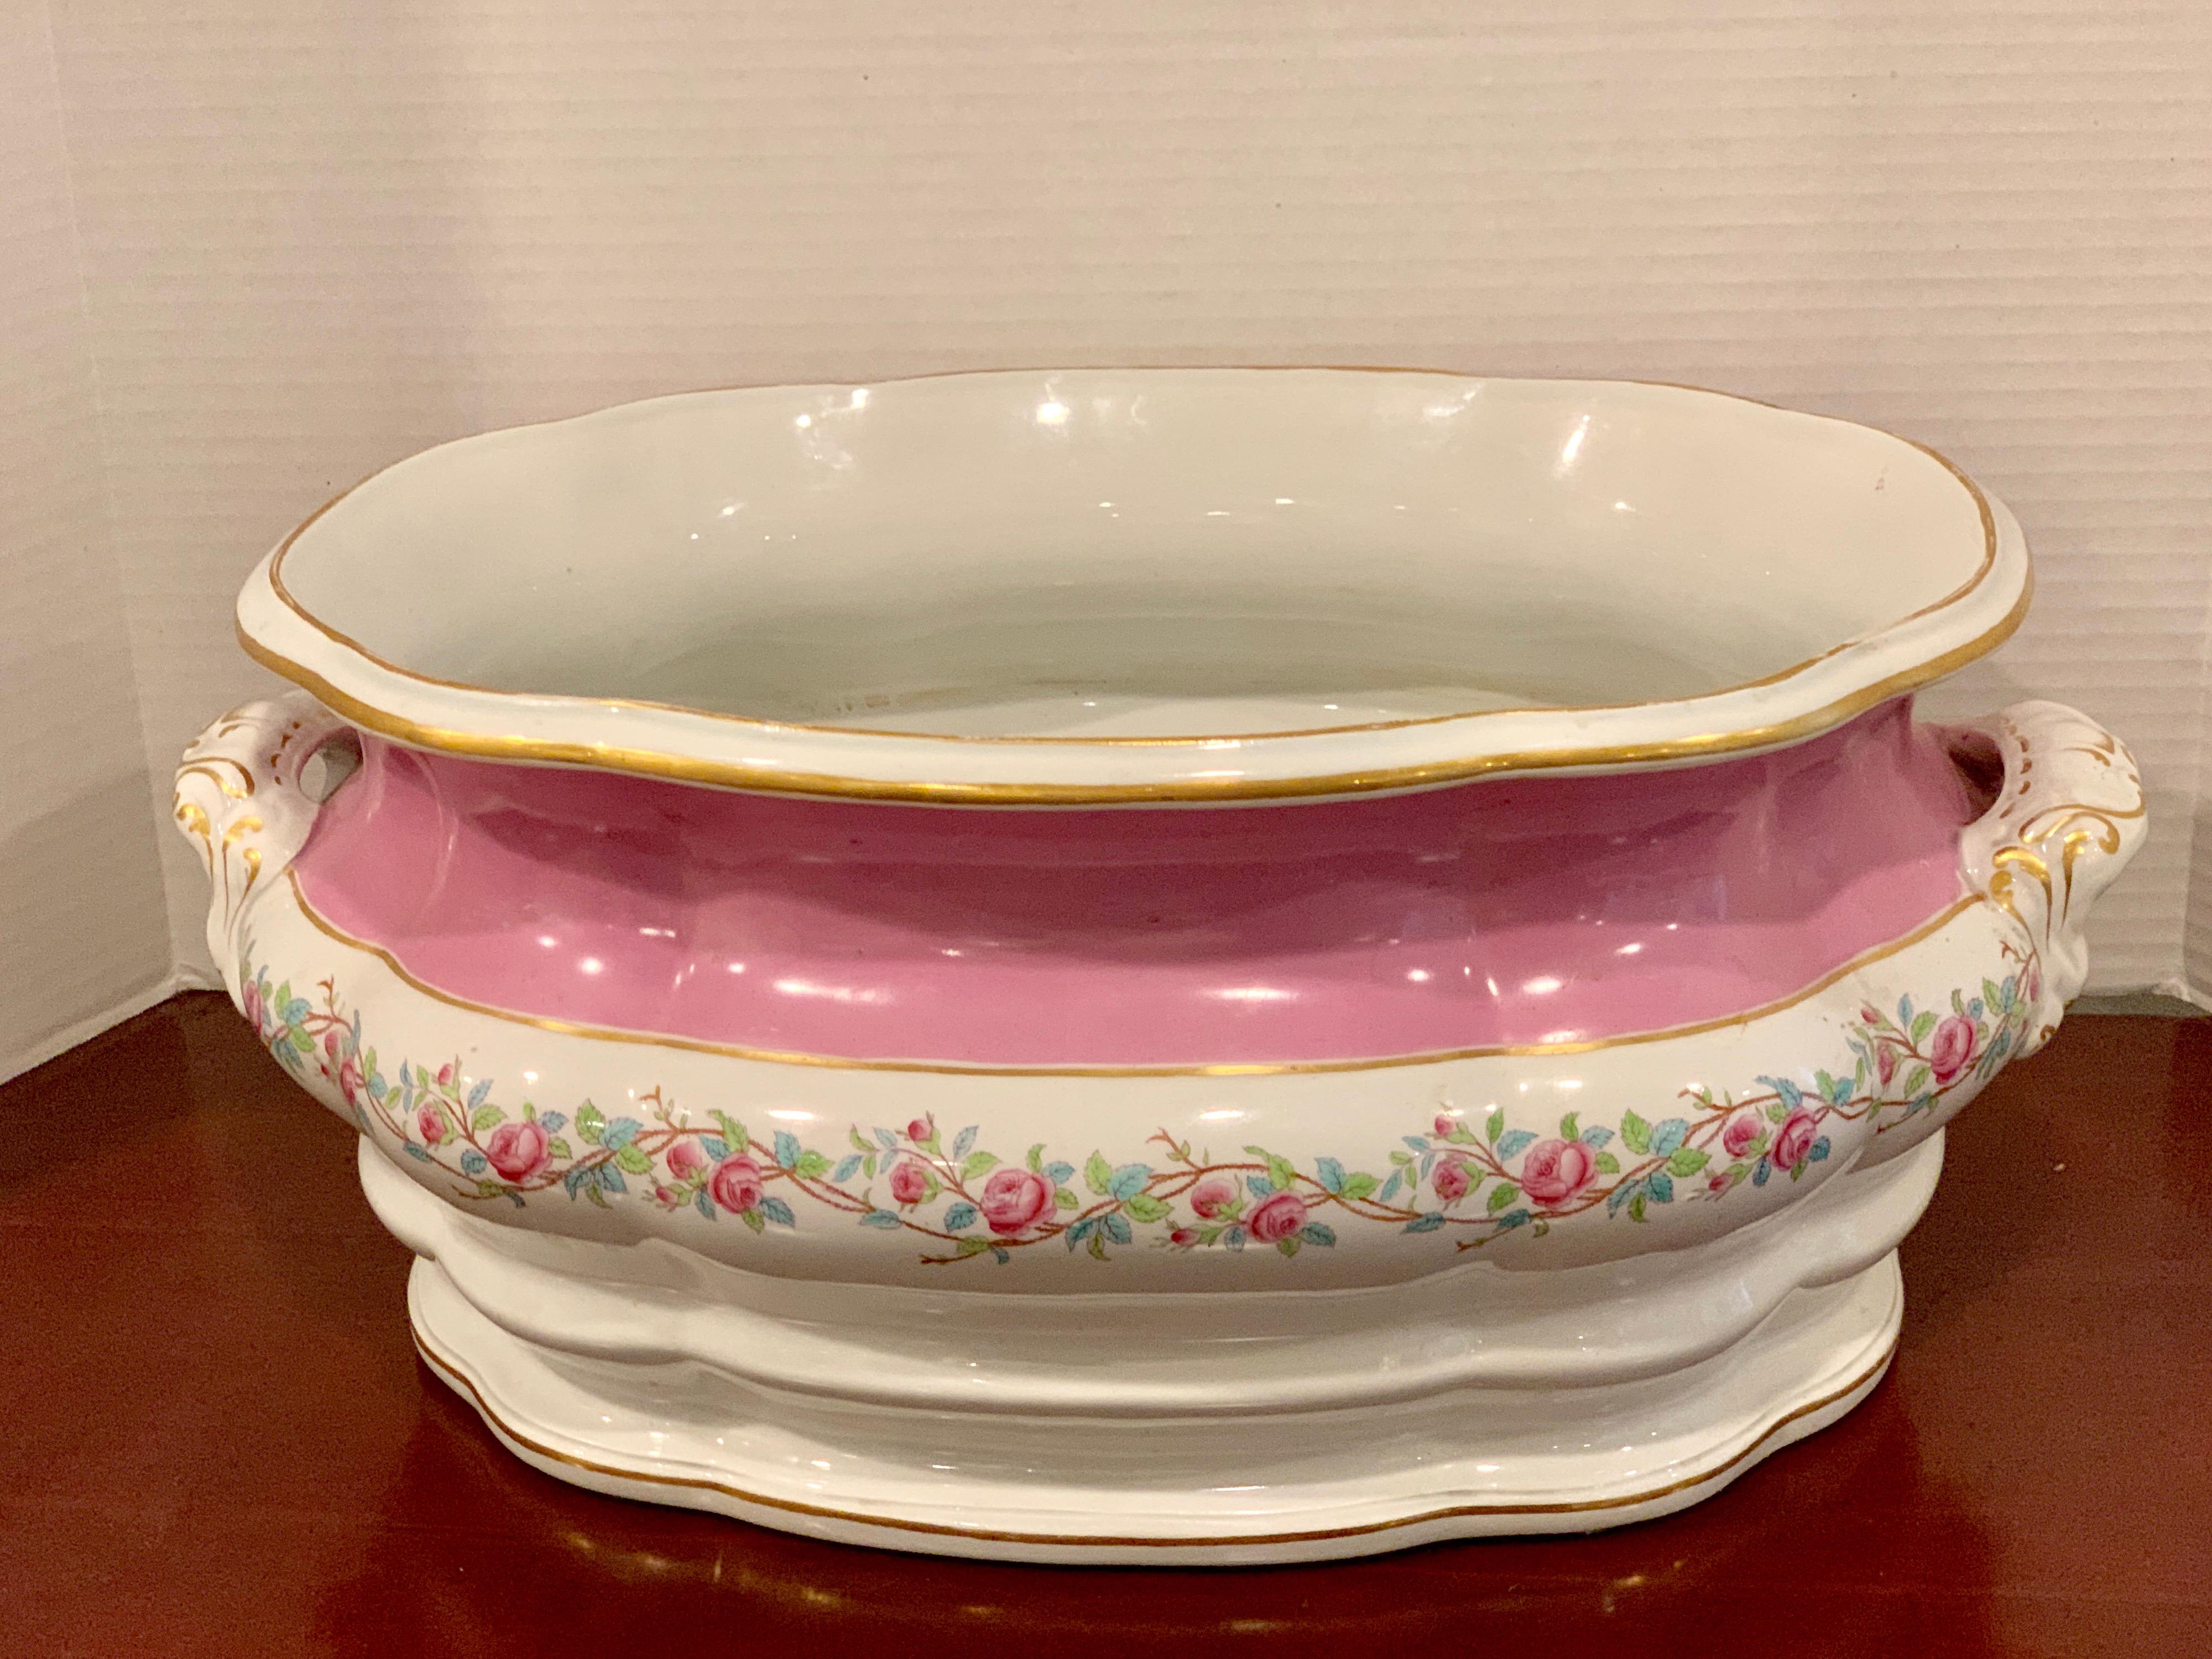 19th Century Pink Floral Porcelain Foot Bath, Attributed to Mintons In Good Condition For Sale In Atlanta, GA